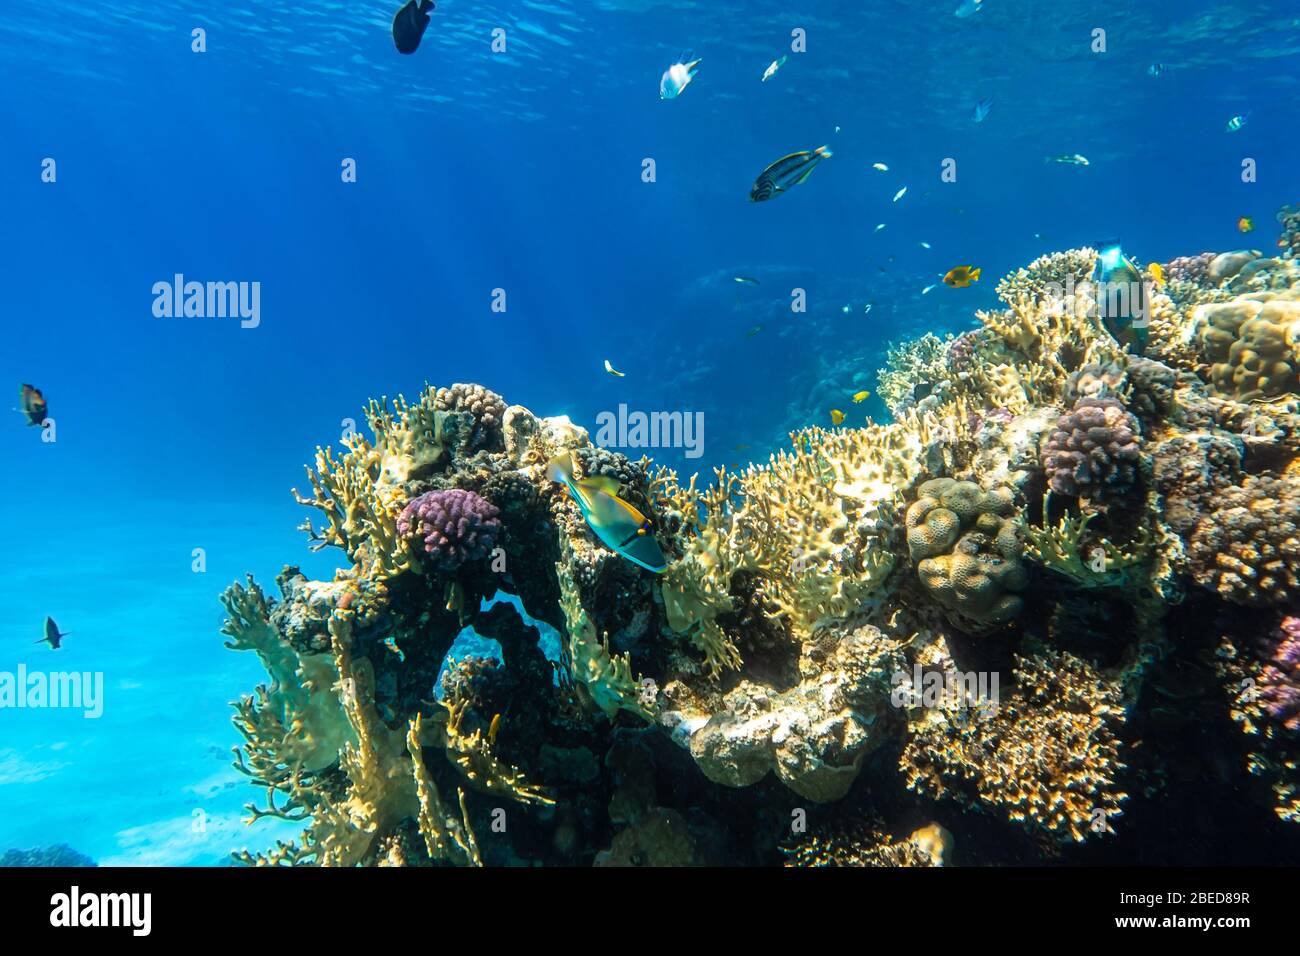 Coral Reef And Tropical Fish In Red Sea, Egypt. Blue Turquoise Clear Ocean Water, Hard Corals And Rock In The Depths, Sun Rays Shining Through Water S Stock Photo